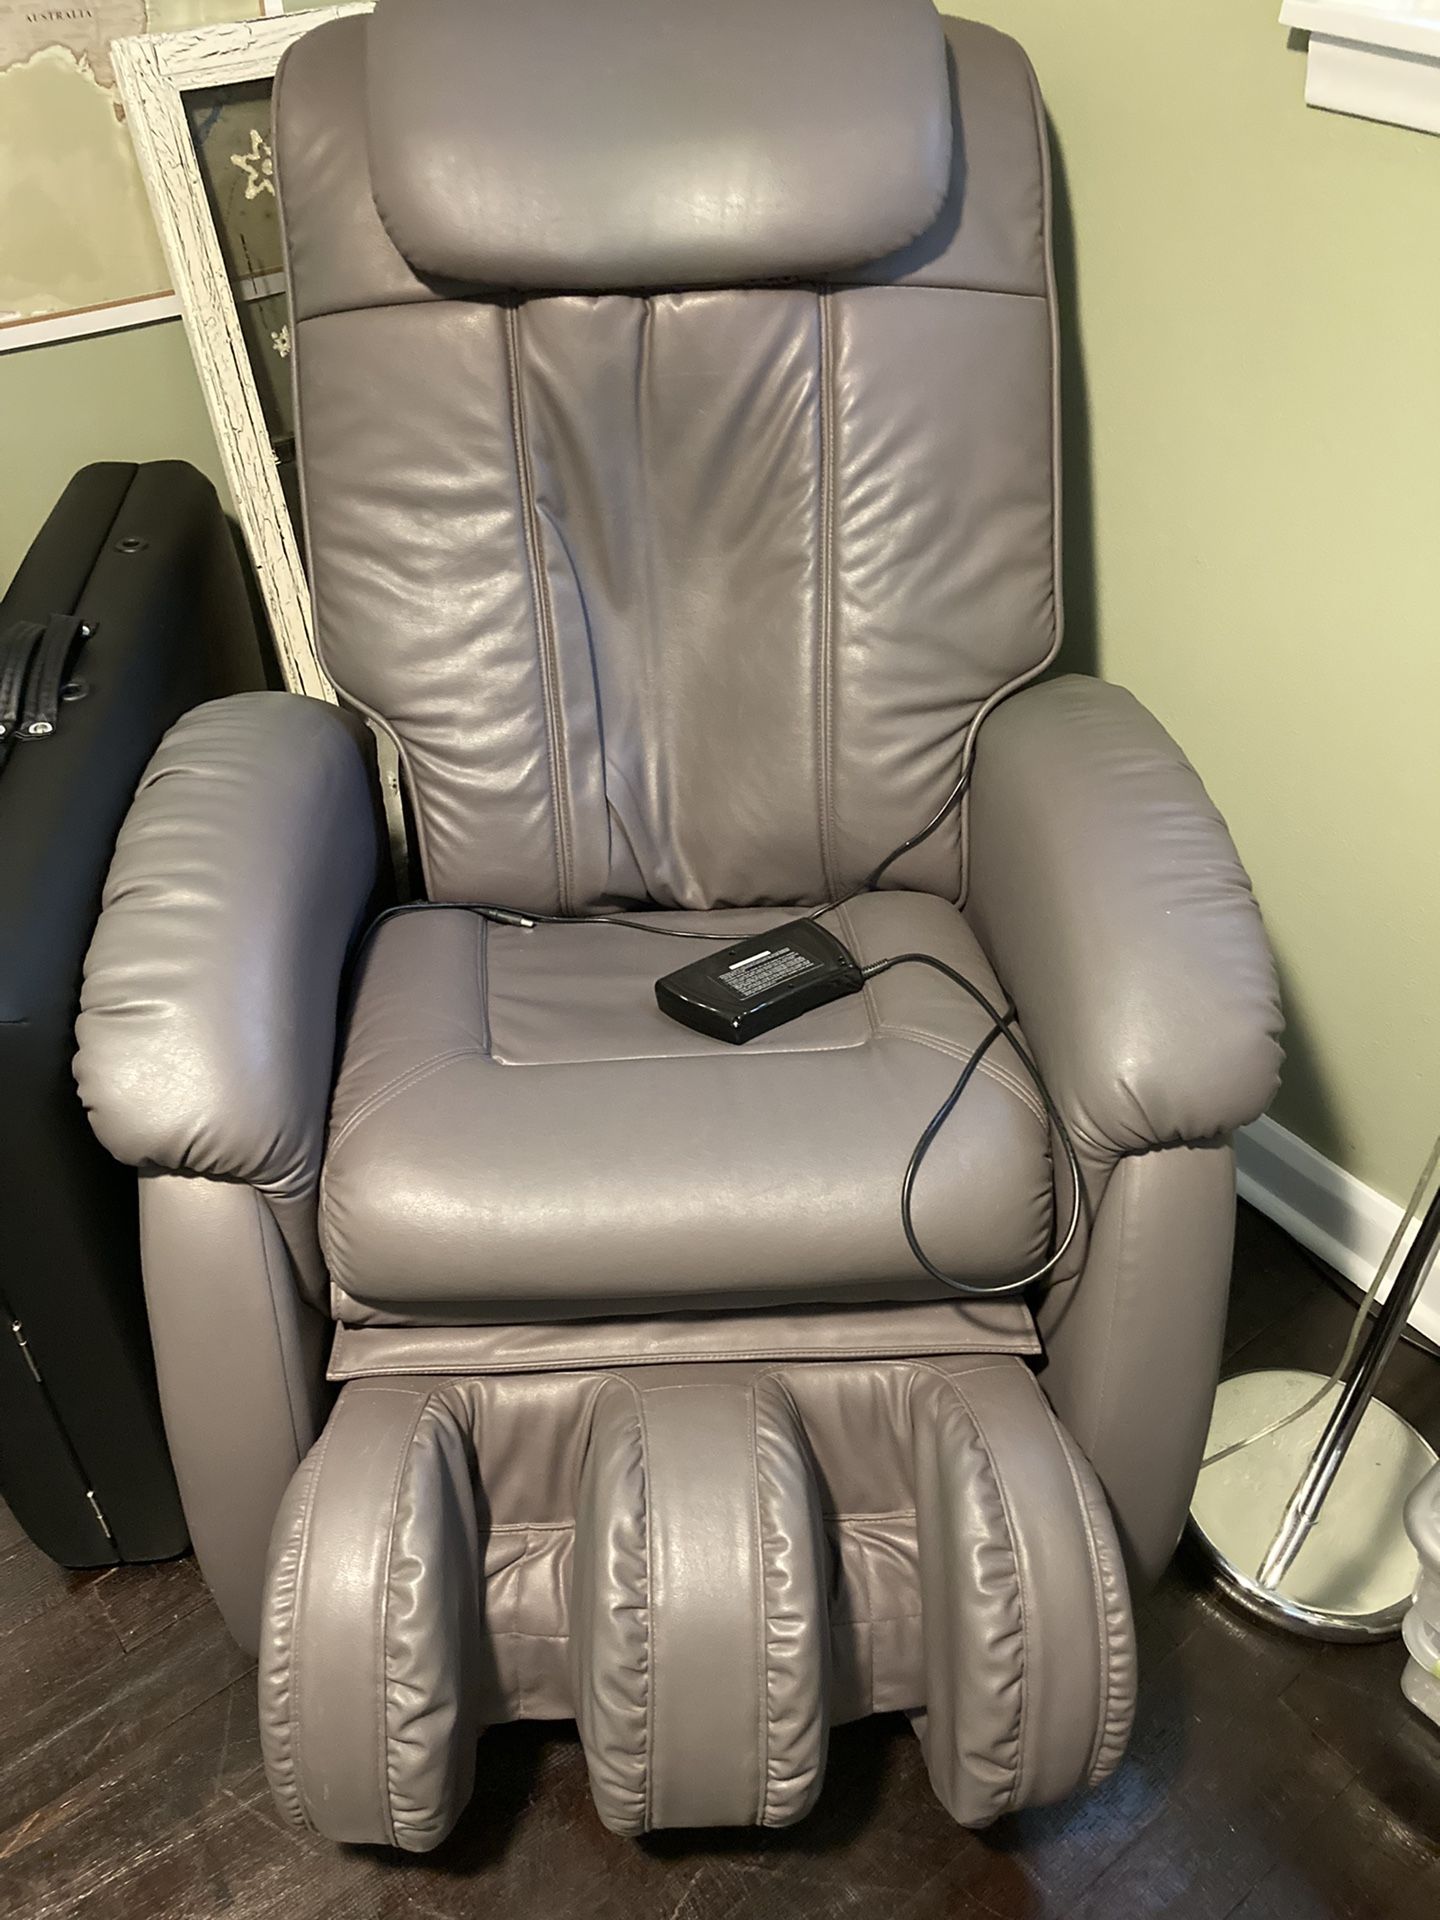 AirMed Model 8000 Massage Chair